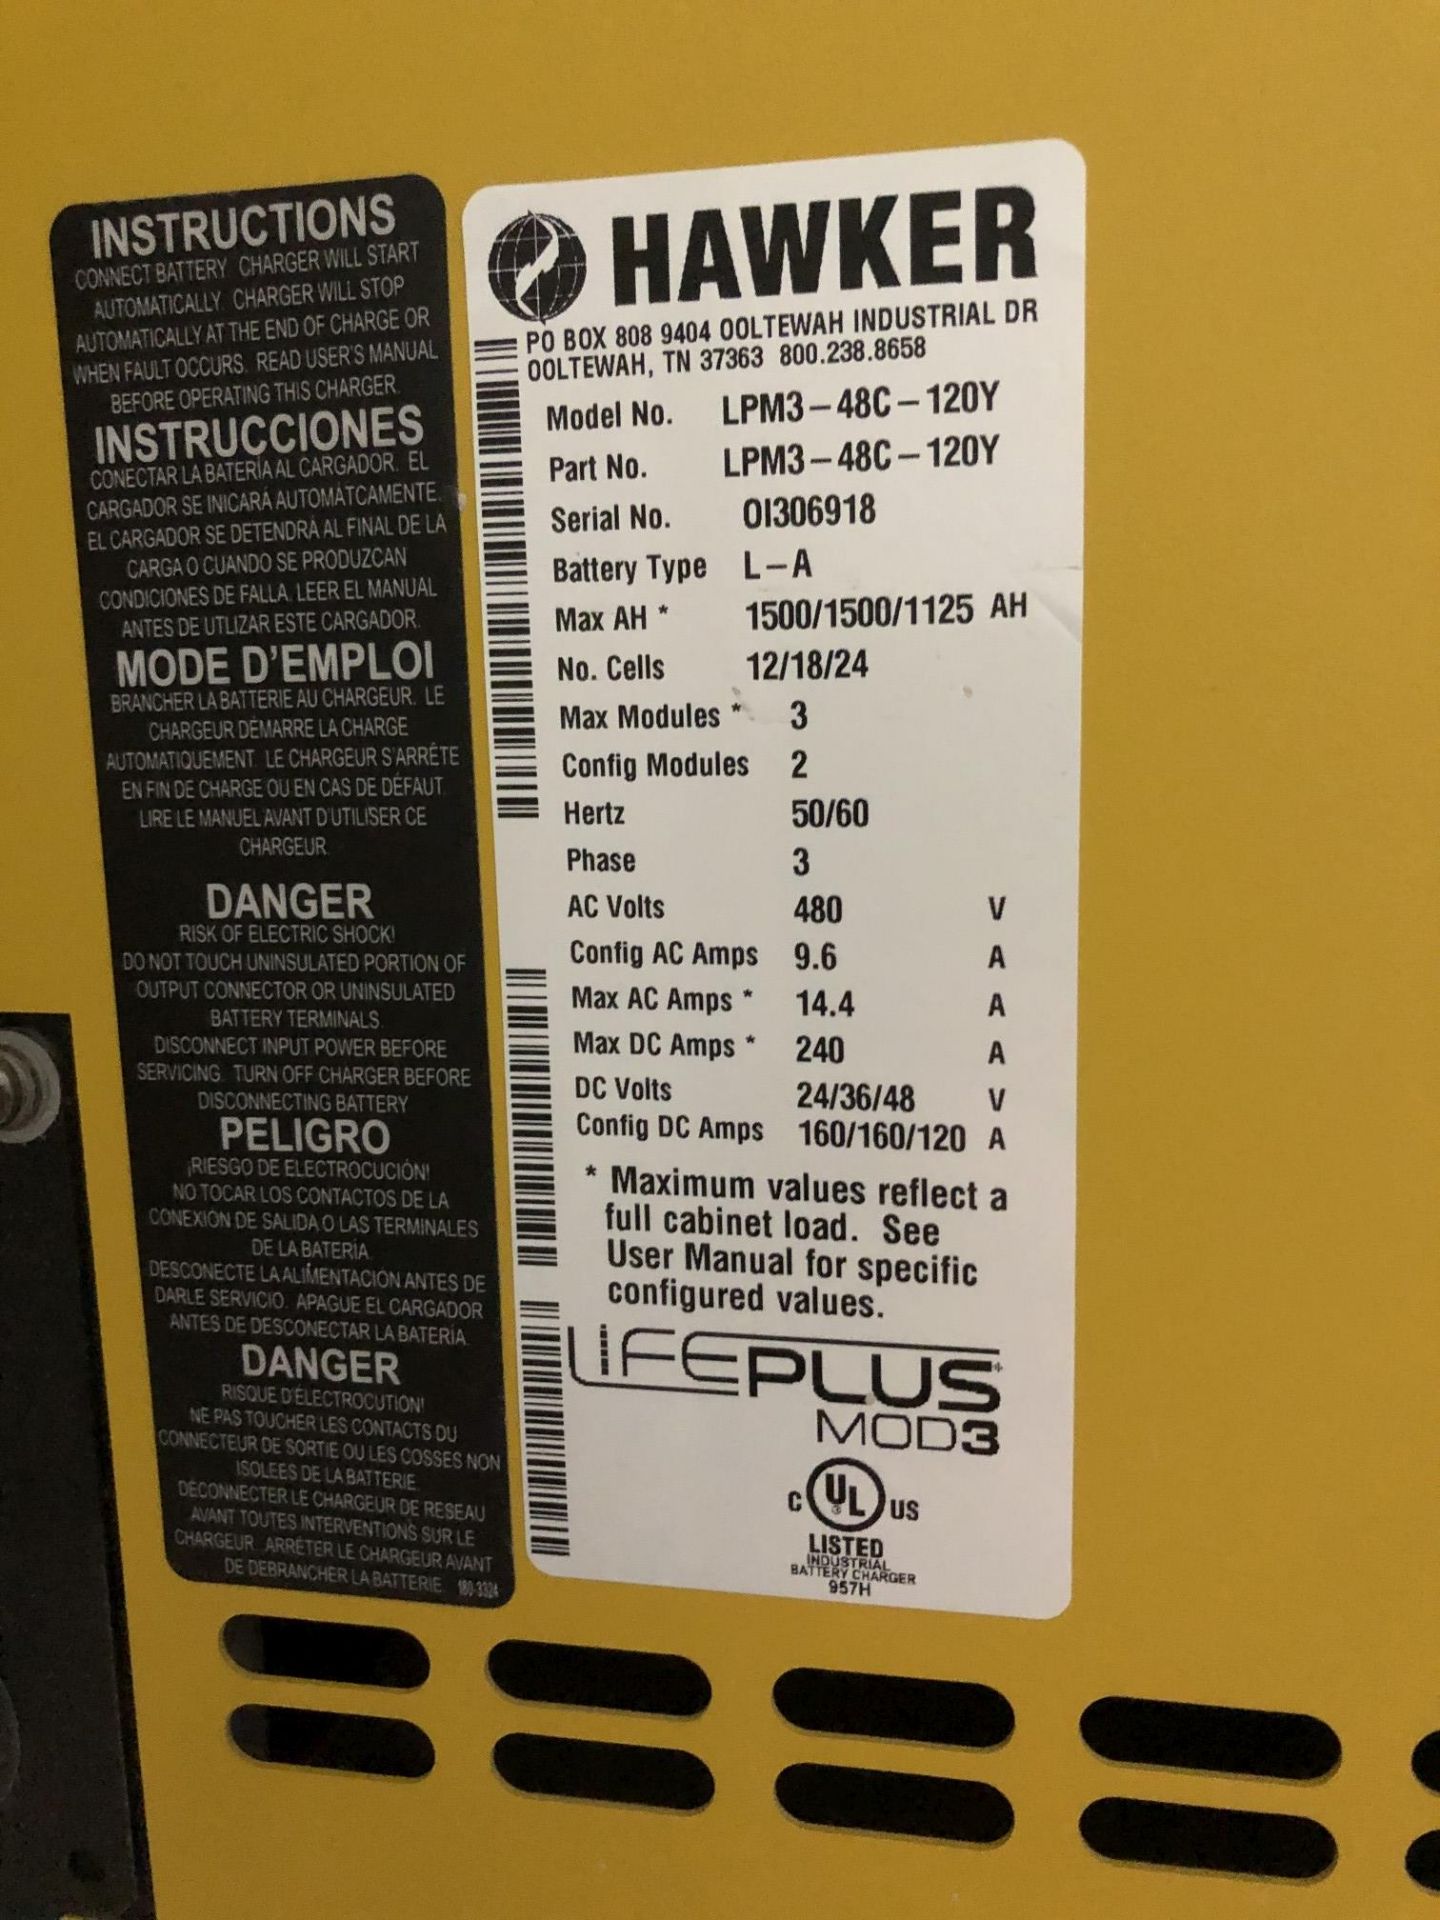 Hawker LifePlus Mod3 Chargers, Model LPM3-48C-120Y, Auto Cell Sizing for 12/18/24 Cells - Image 5 of 5